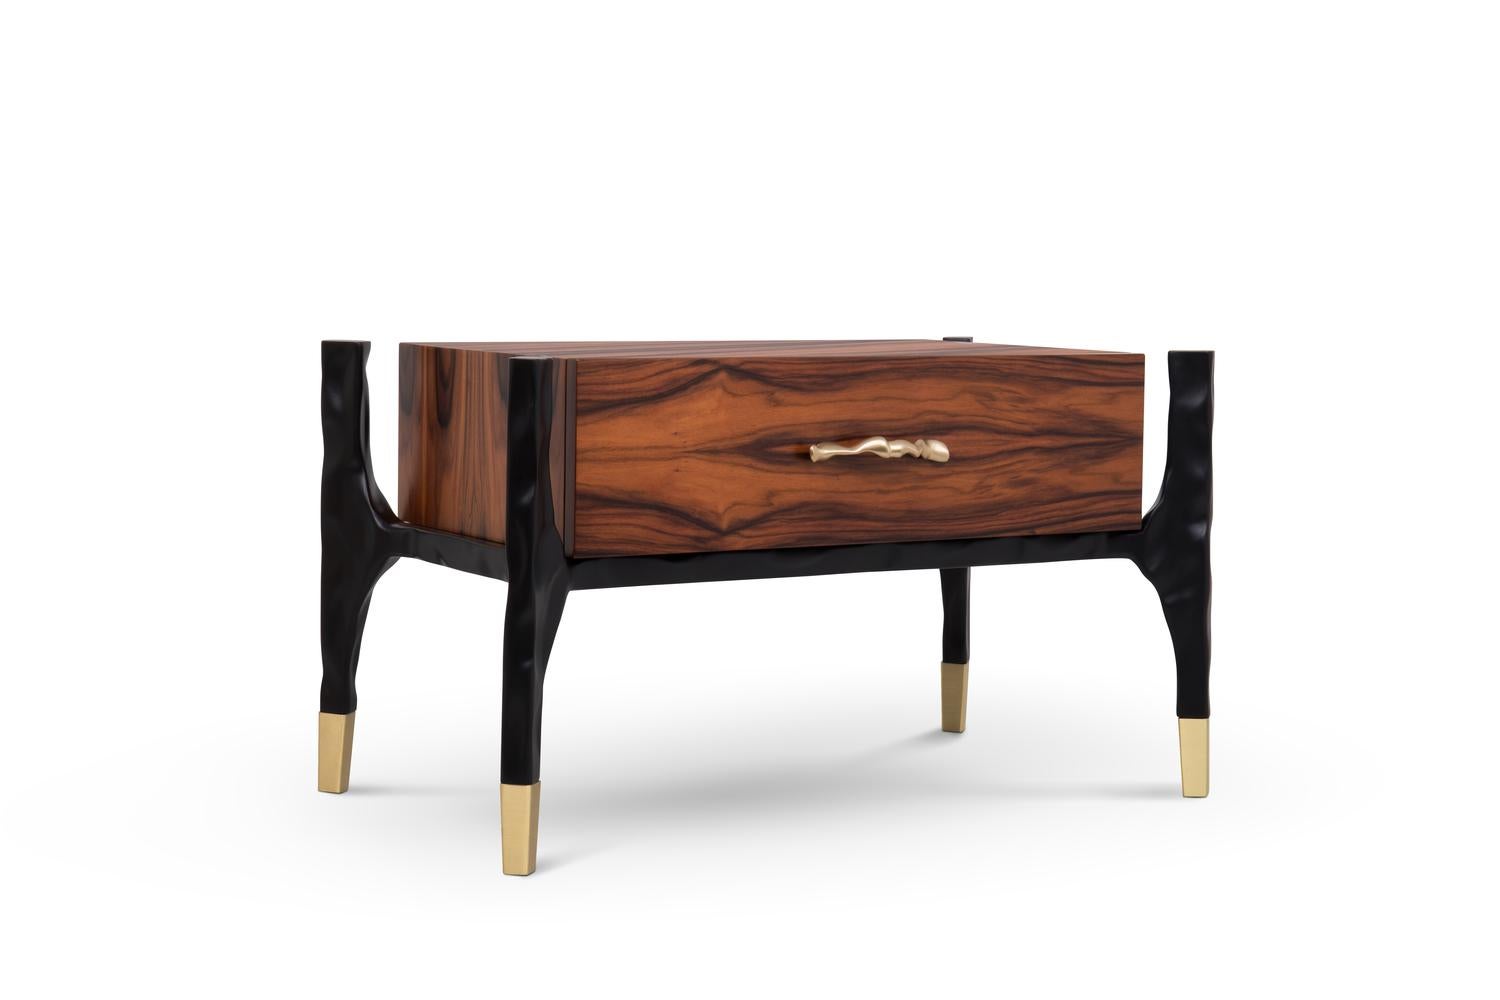 Lanka bedside table is inspired in a traditional method practiced in Sri Lanka, the stilt ?shing, now disappearing. The vertical poles embeded into the sea ?oor are the main reference for the structure of Lanka: in matte black lacquer, it supports